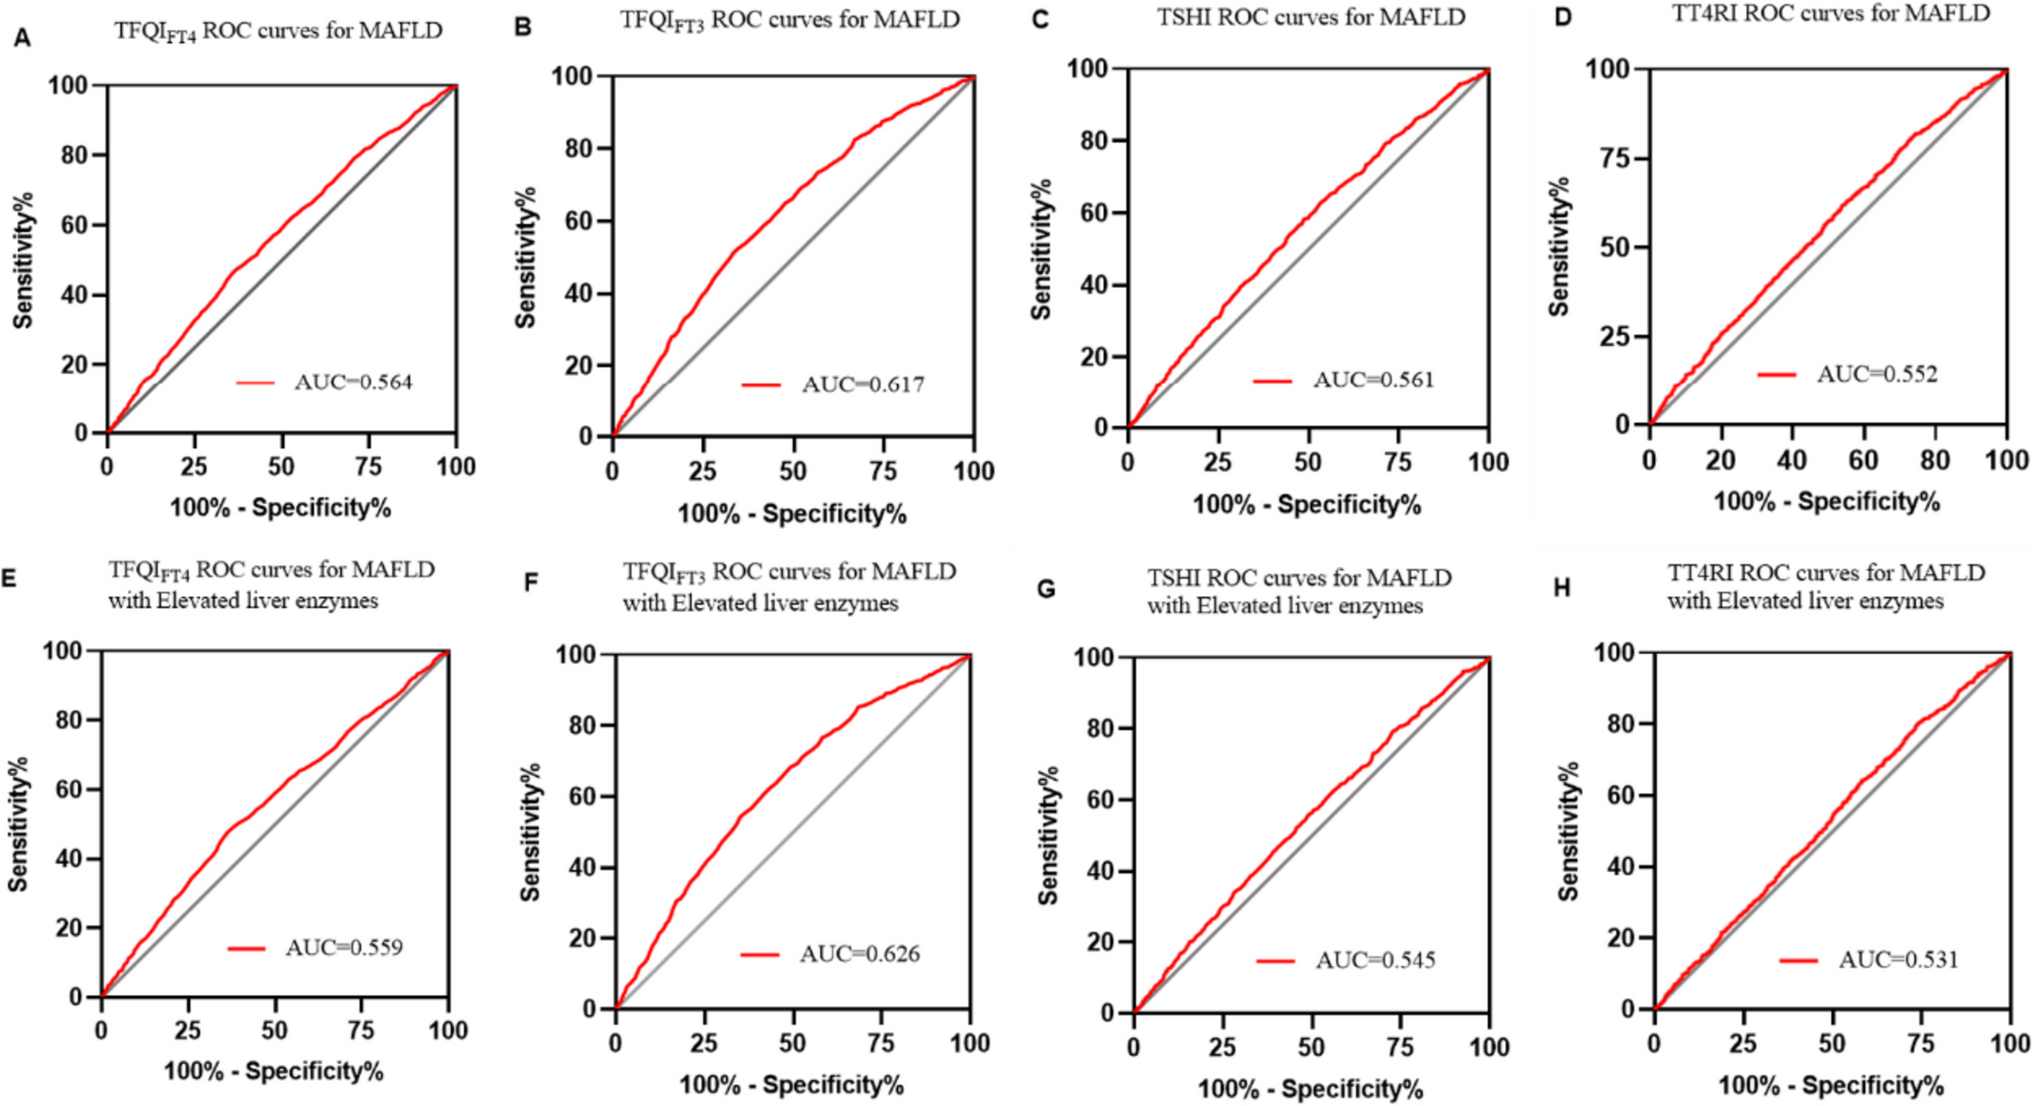 Relationship between impaired sensitivity to thyroid hormones and MAFLD with elevated liver enzymes in the euthyroid population